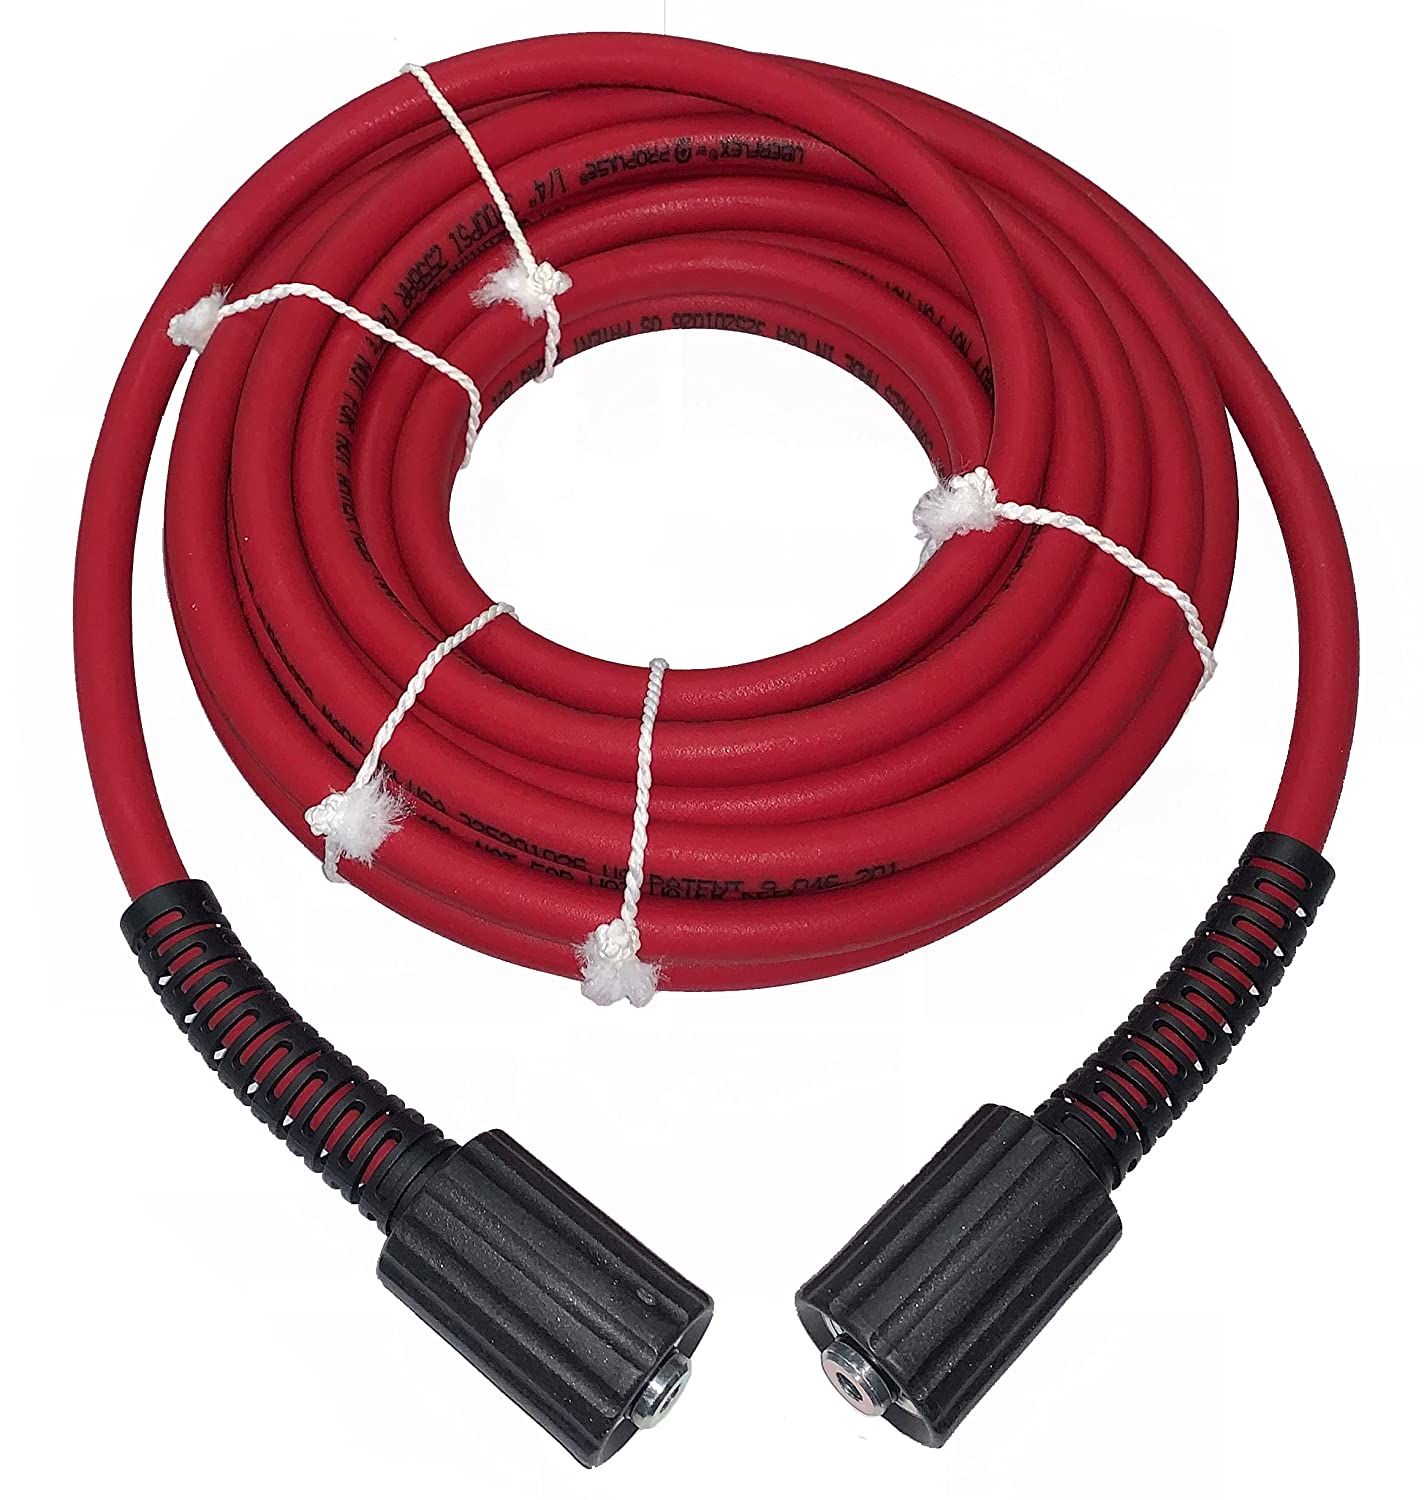 Red UBERFLEX Kink Resistant Pressure Washer Hose 1/4" x 30' 3,700 PSI with (2) 22MM